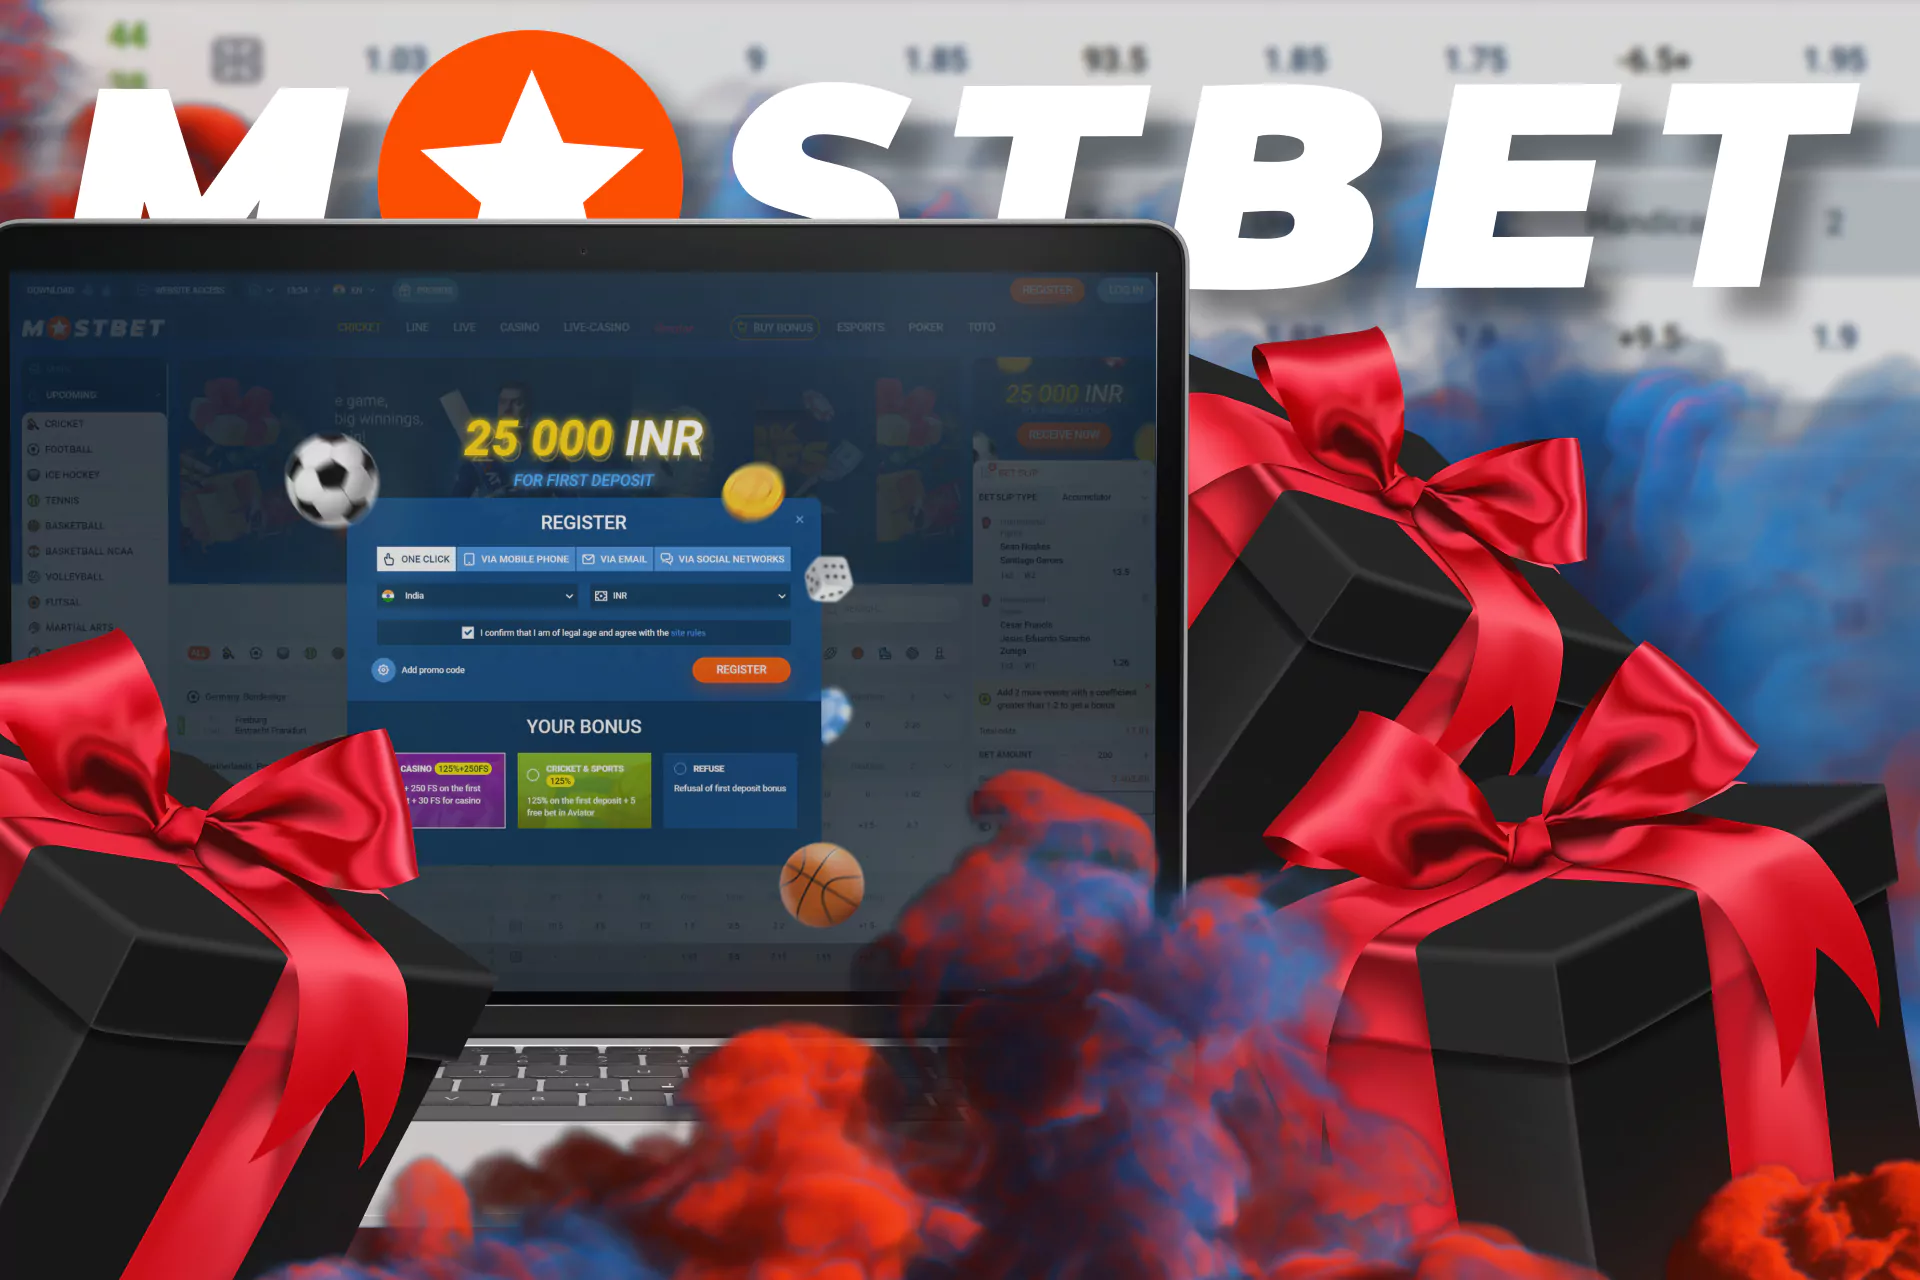 With Mostbet you will get your first tennis betting bonus right during registration.